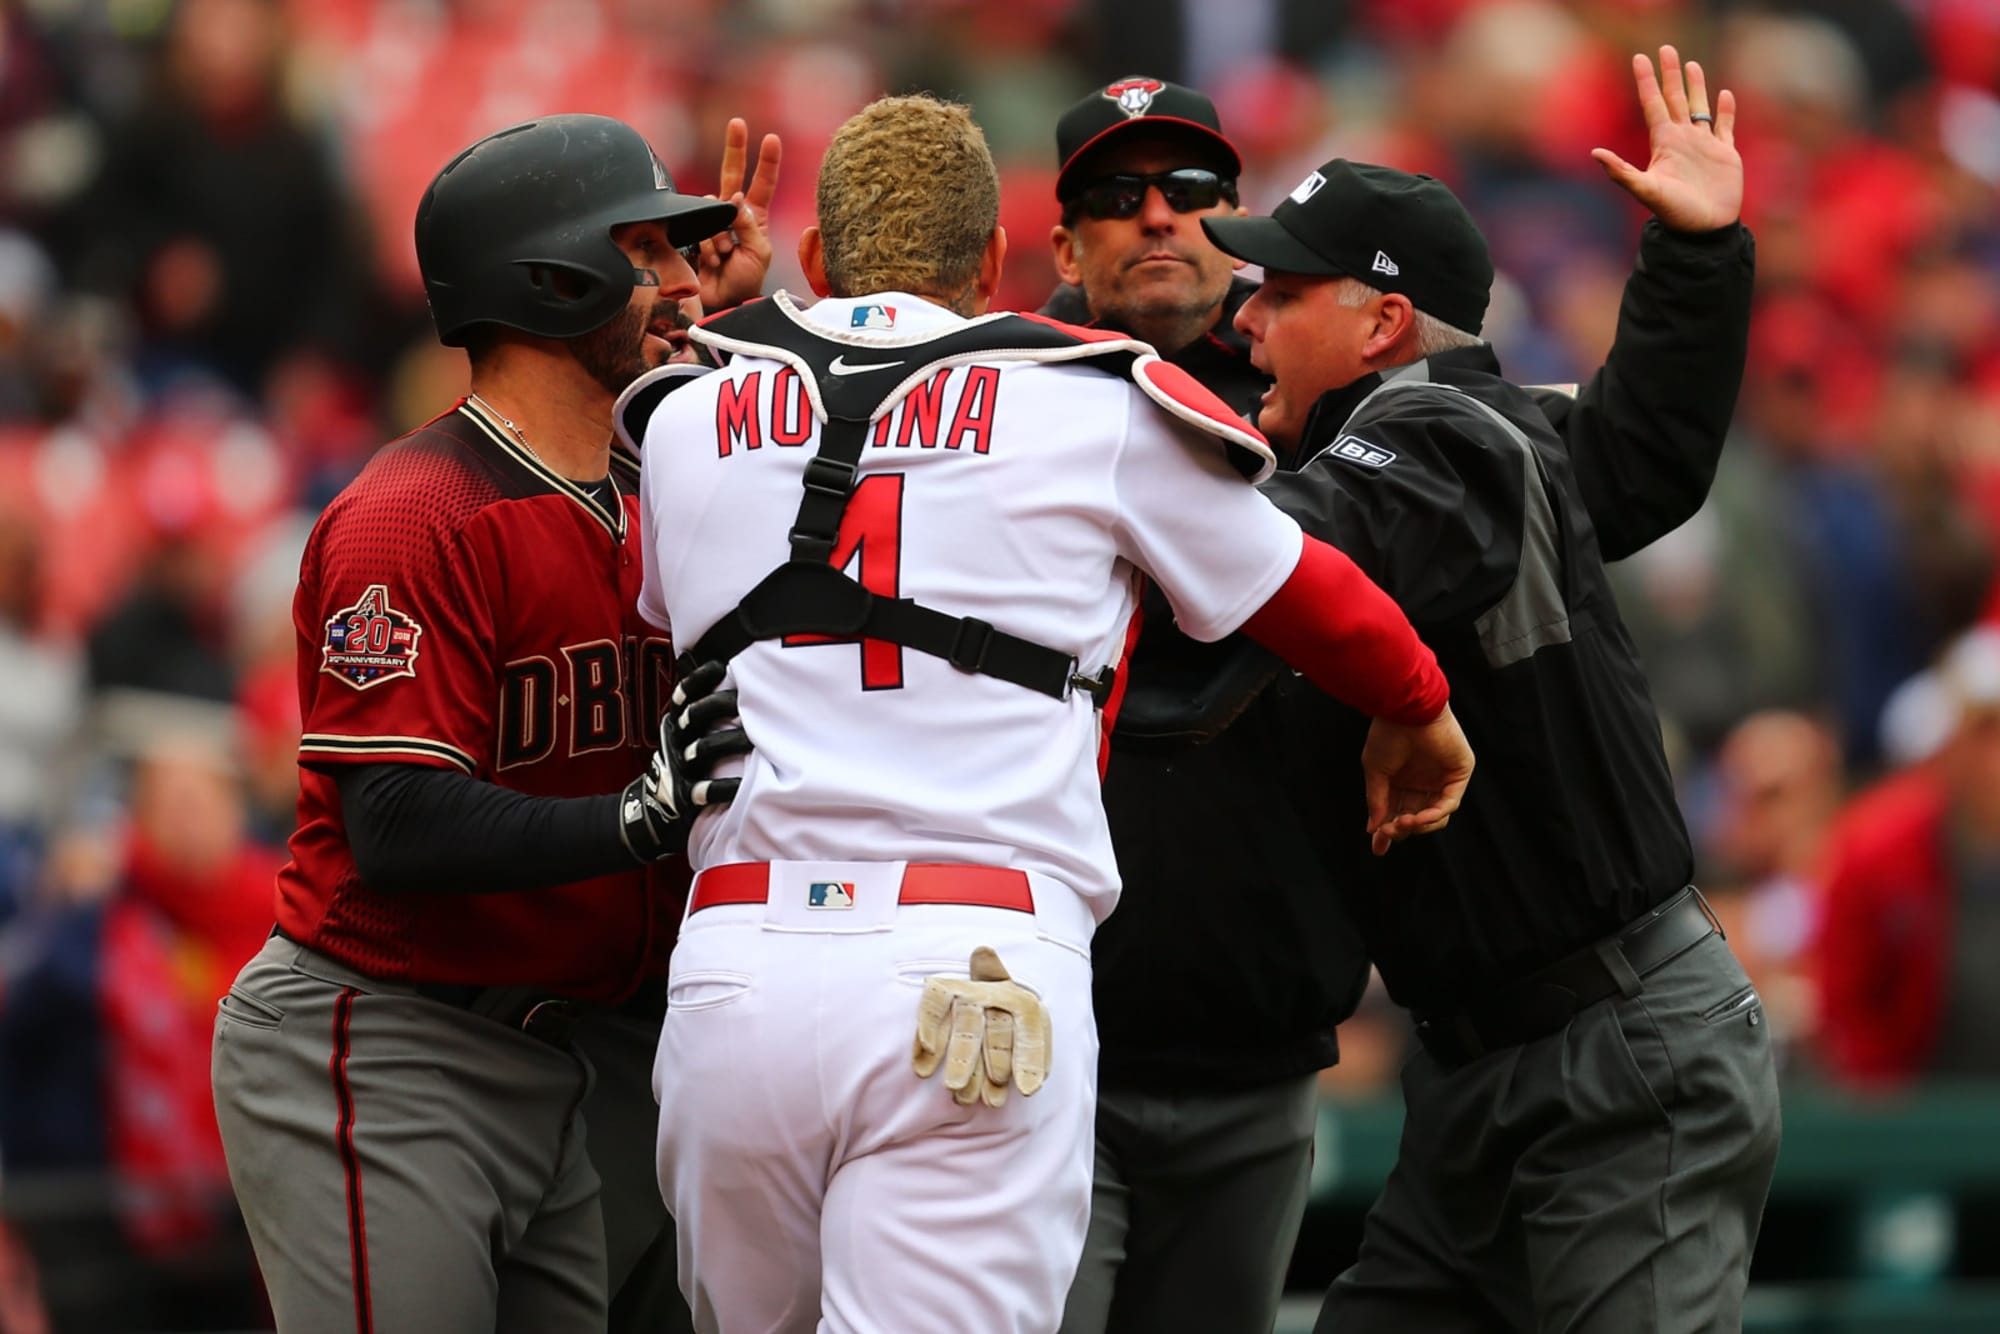 St. Louis Cardinals: Yadier Molina was right to fight